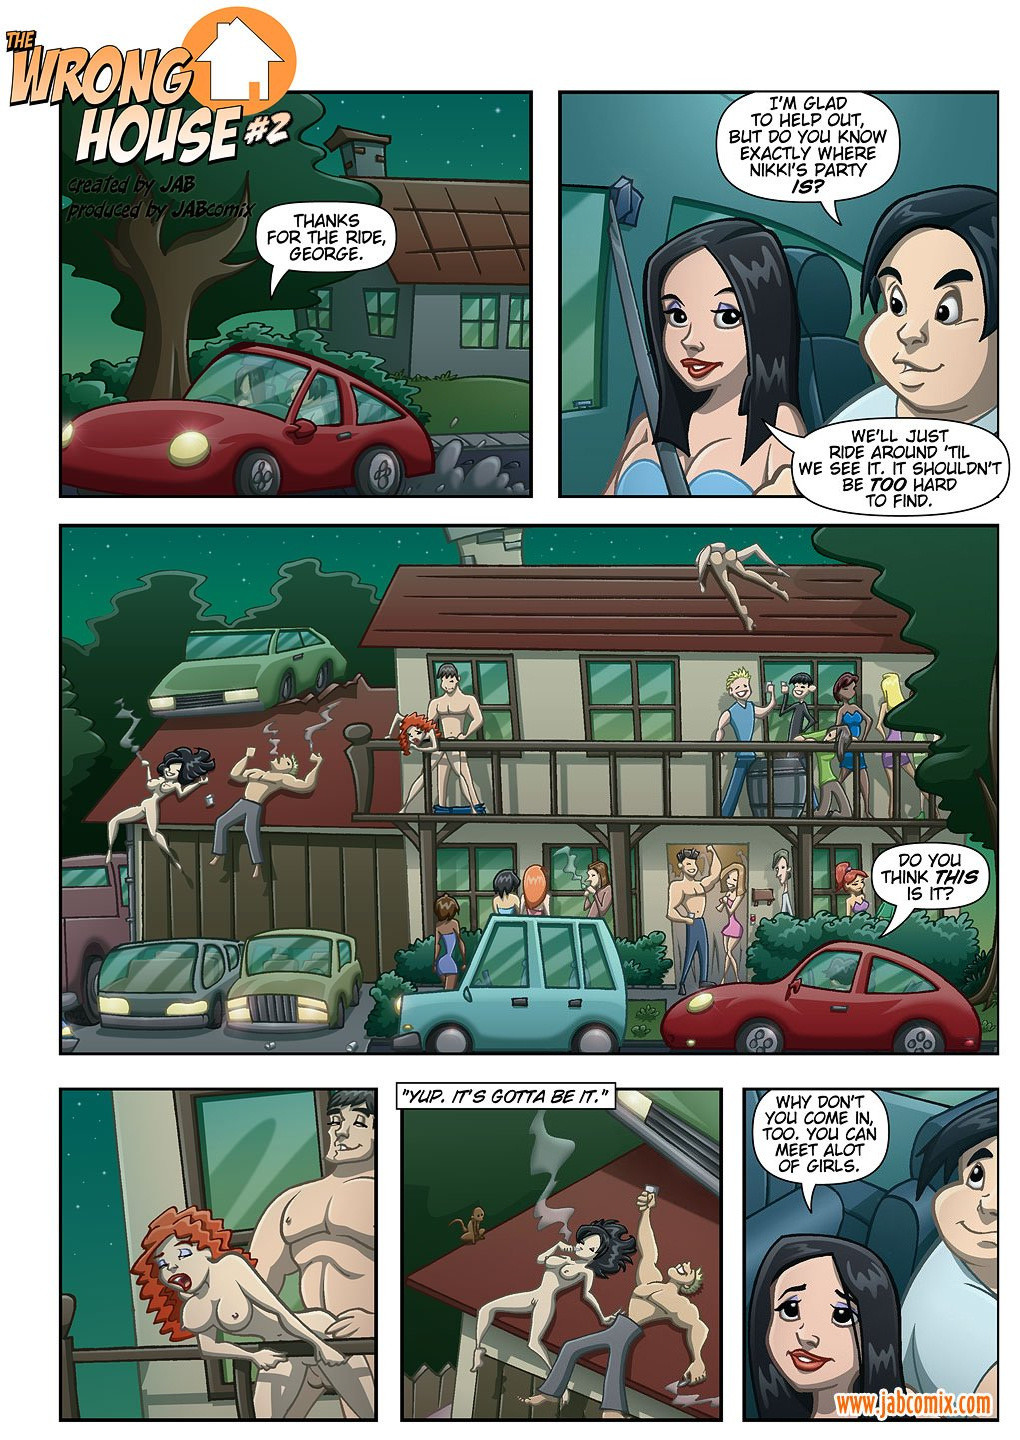 6325231 main The Wrong House 2 Page01